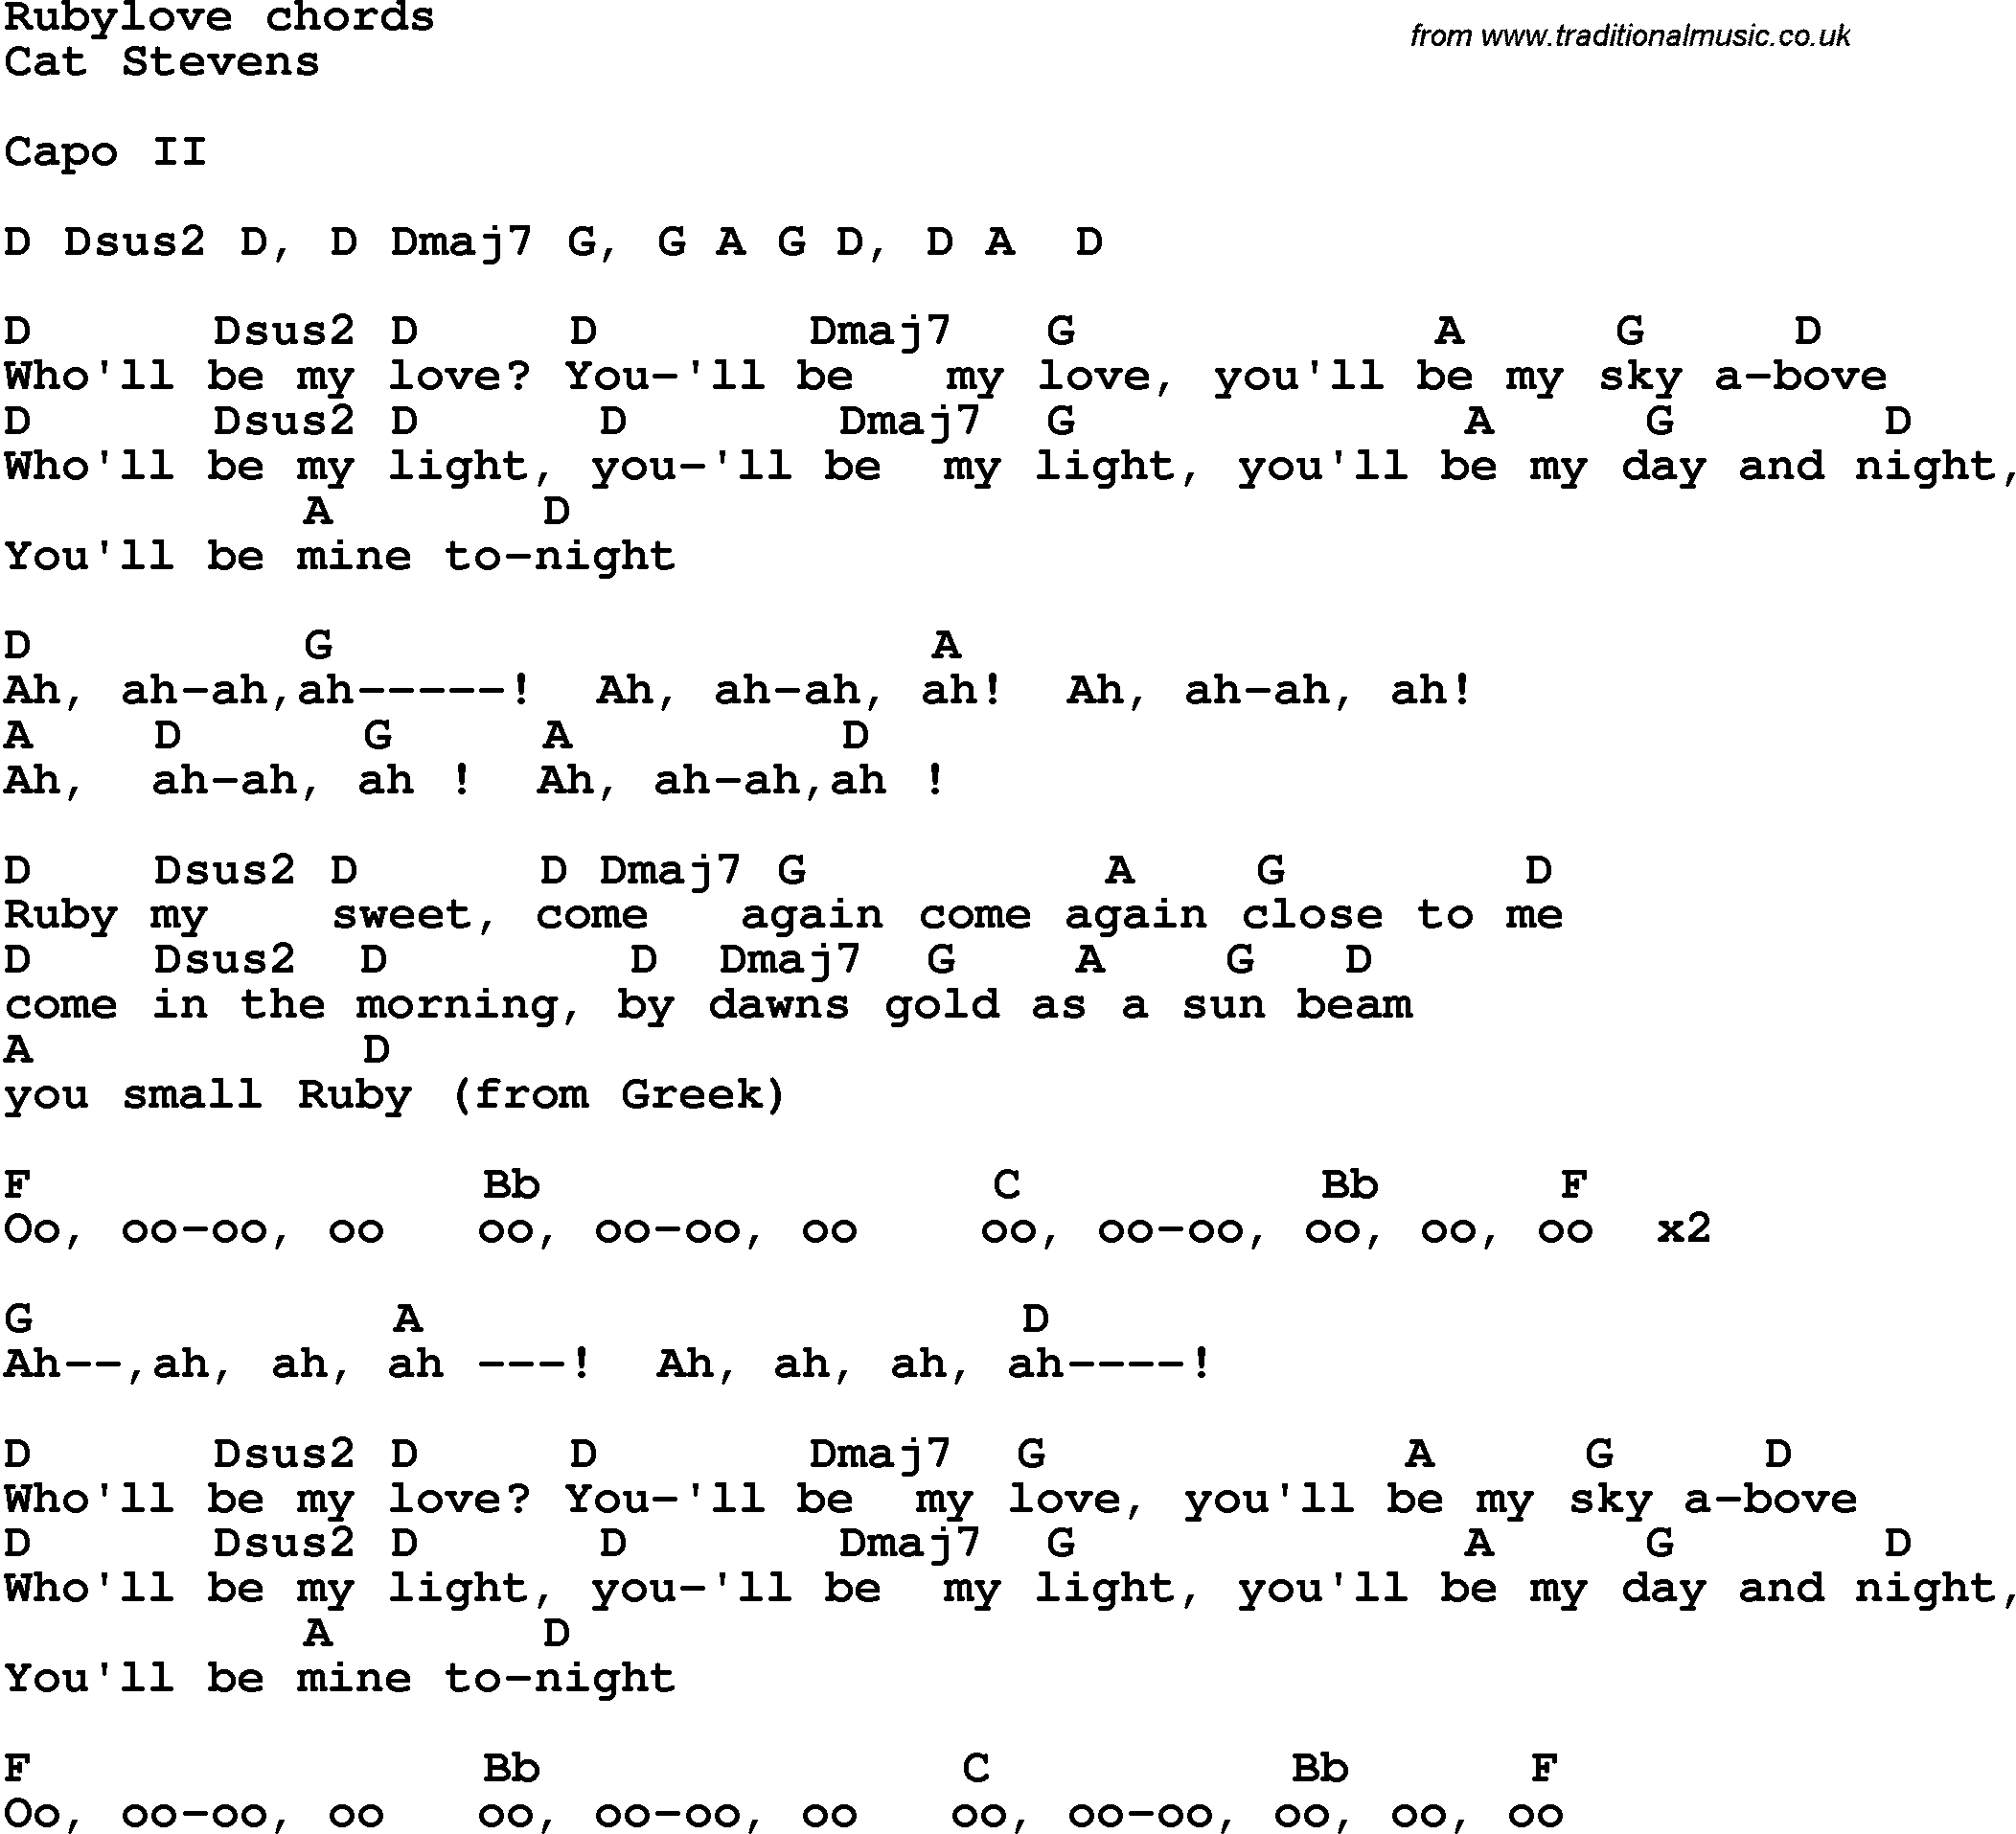 Song Lyrics with guitar chords for Ruby Loved